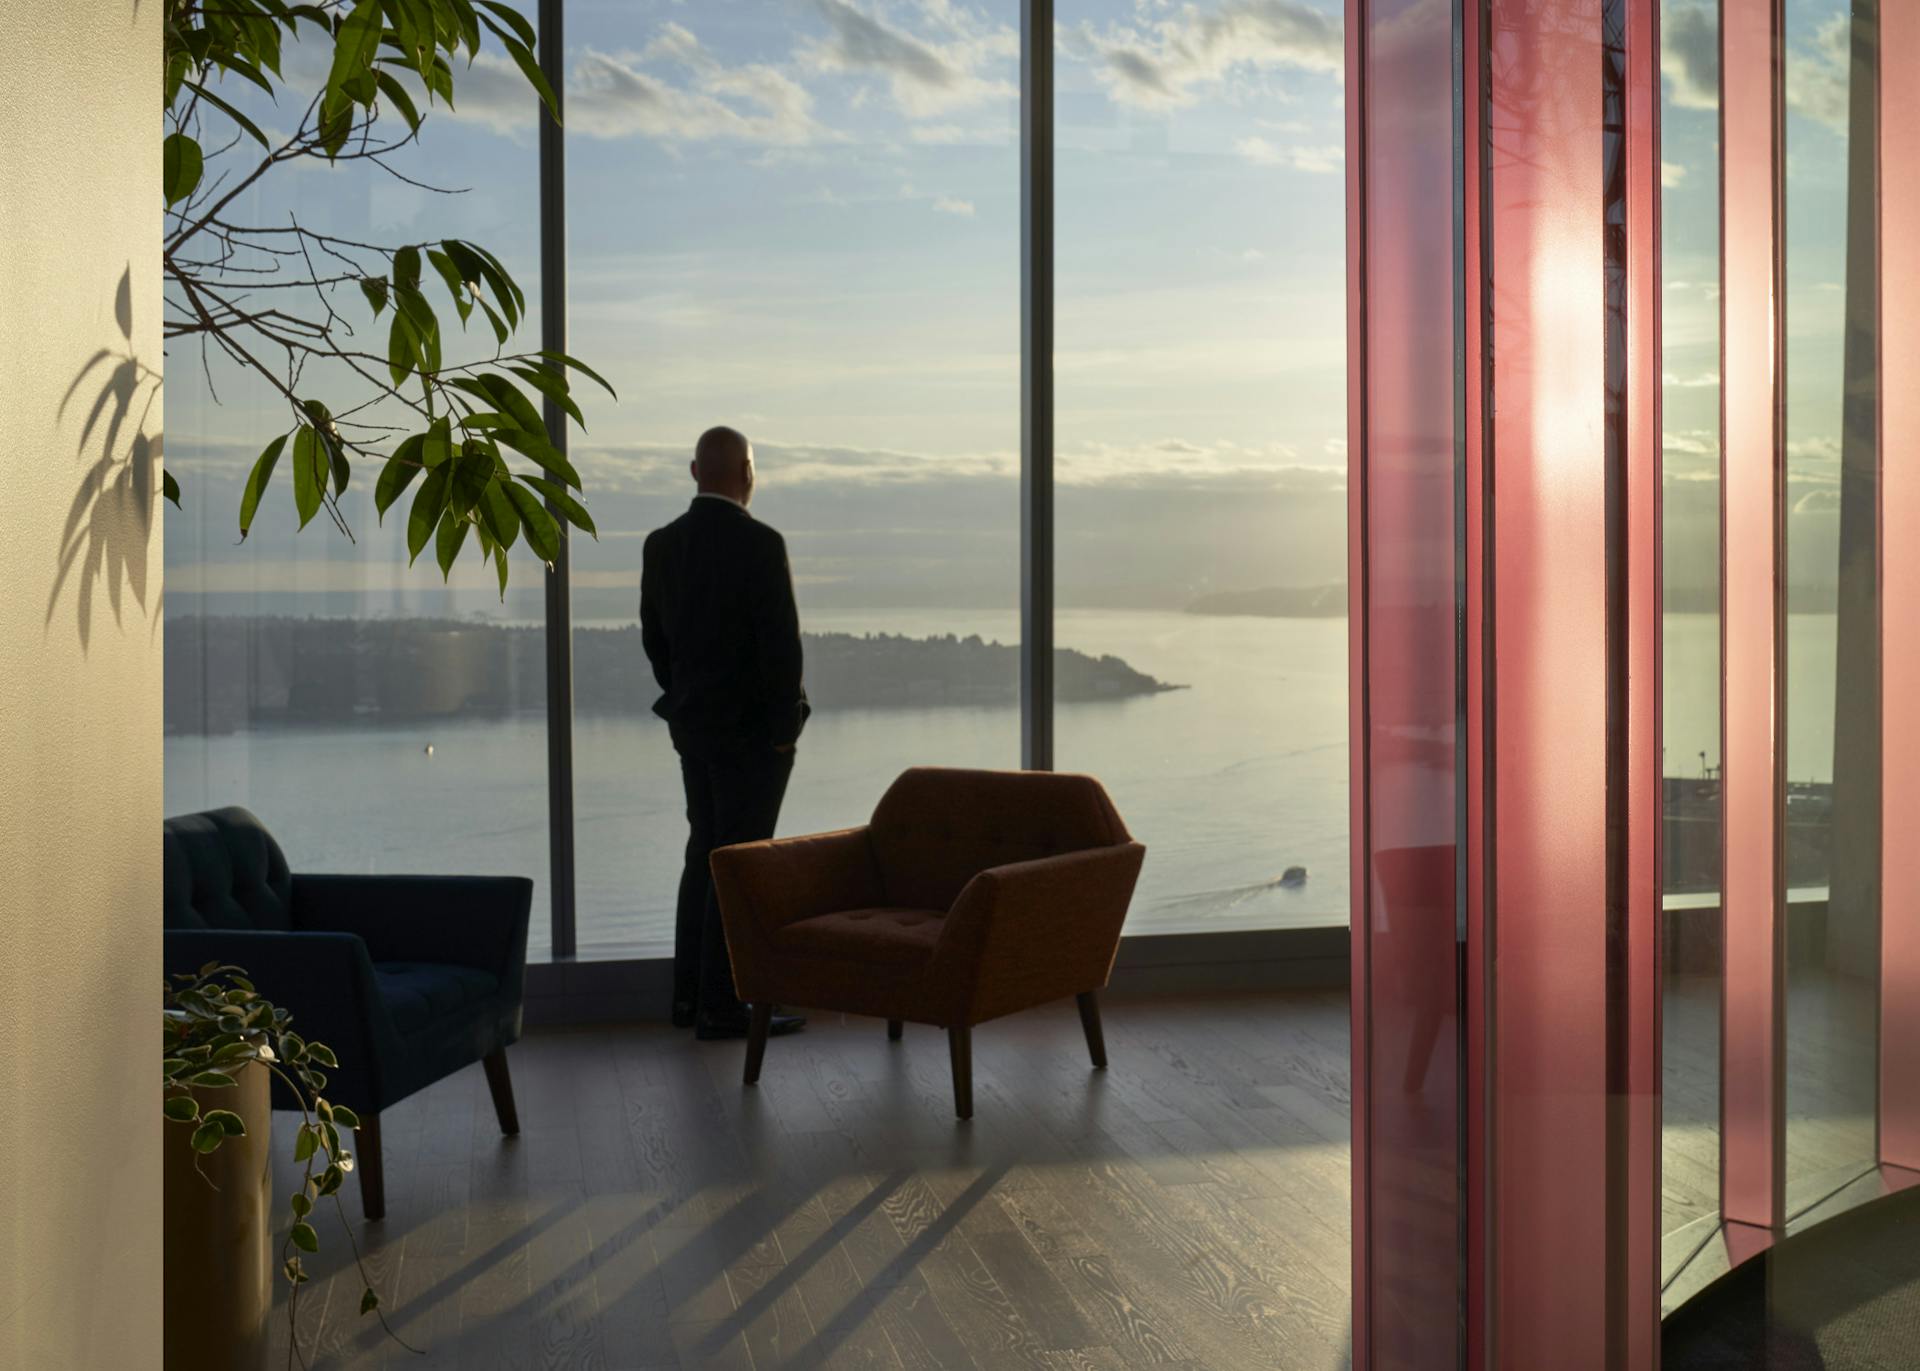 F5 Executive Level, corner seating, dusk, ferry, puget sound, interiors, glass fins, view, sunset, water, mountains, PNW, Seatle, WA